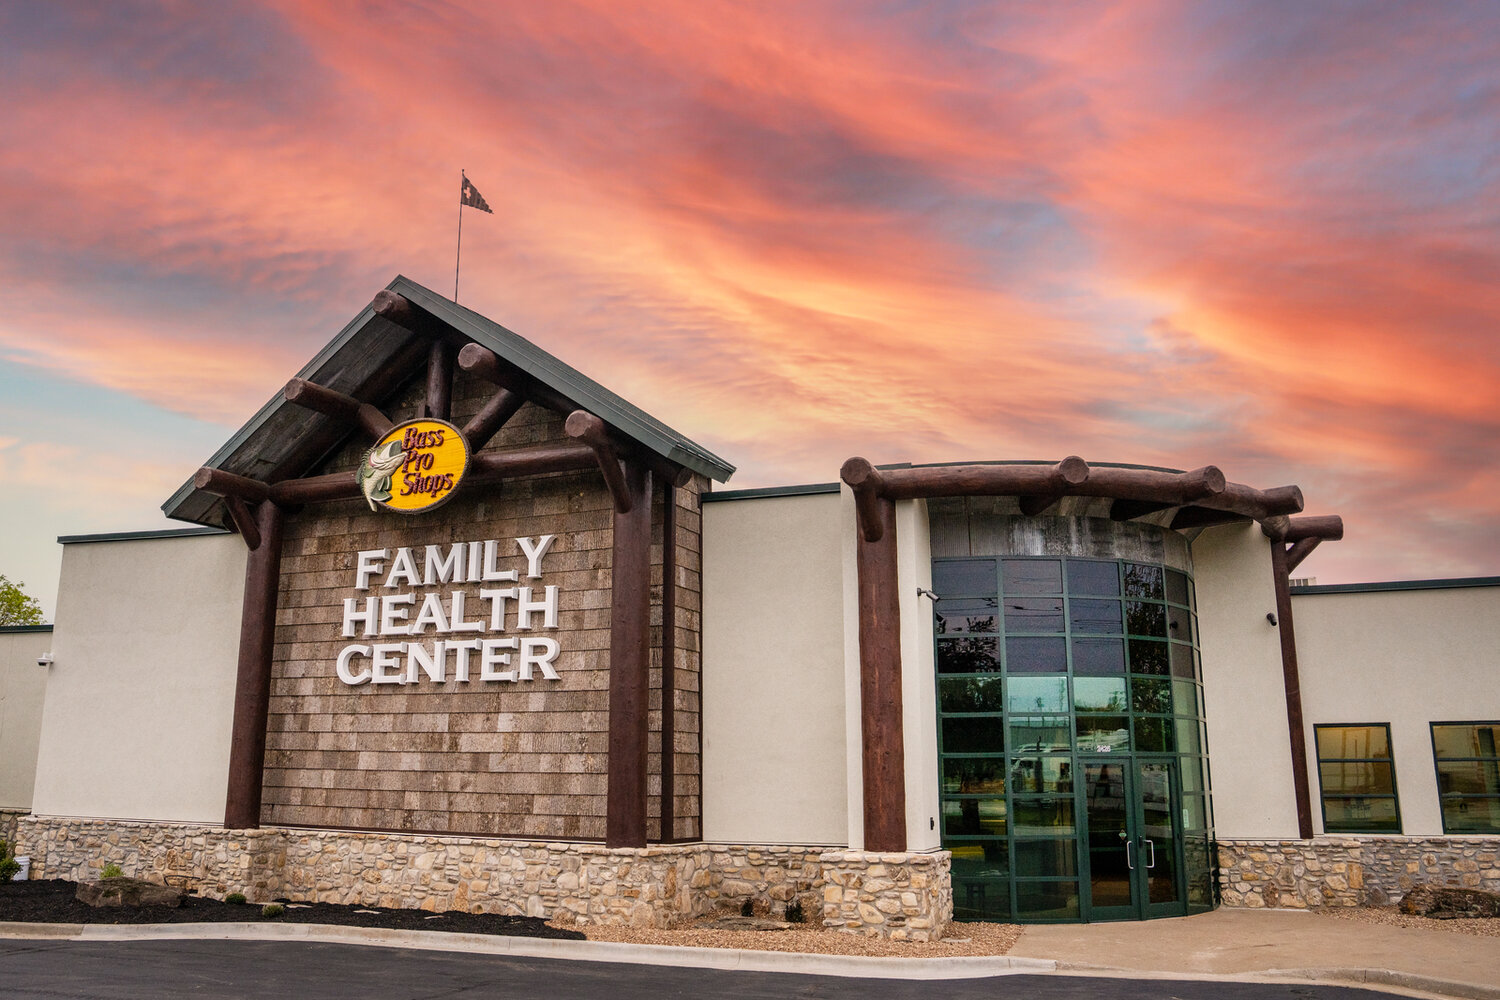 The renovation of a former bus depot has officially made way for the Bass Pro Shops Family Health Center.